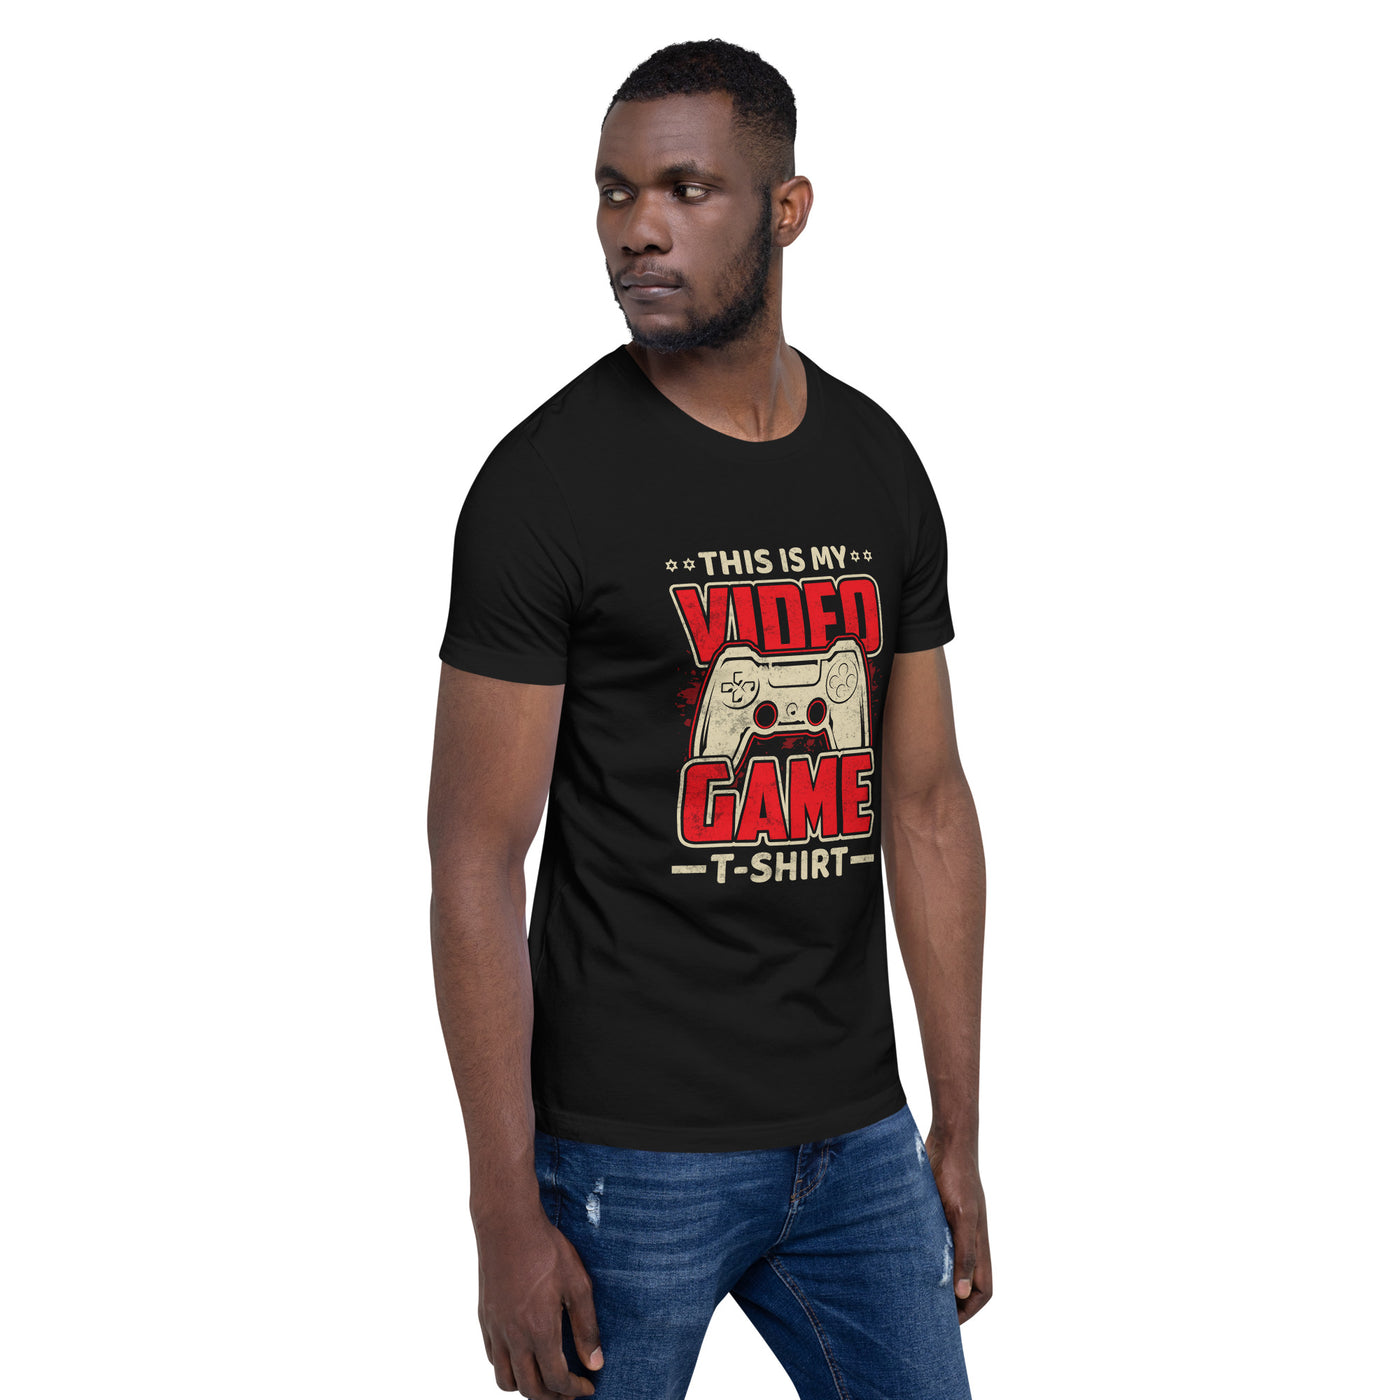 This is my Video Game - Unisex t-shirt